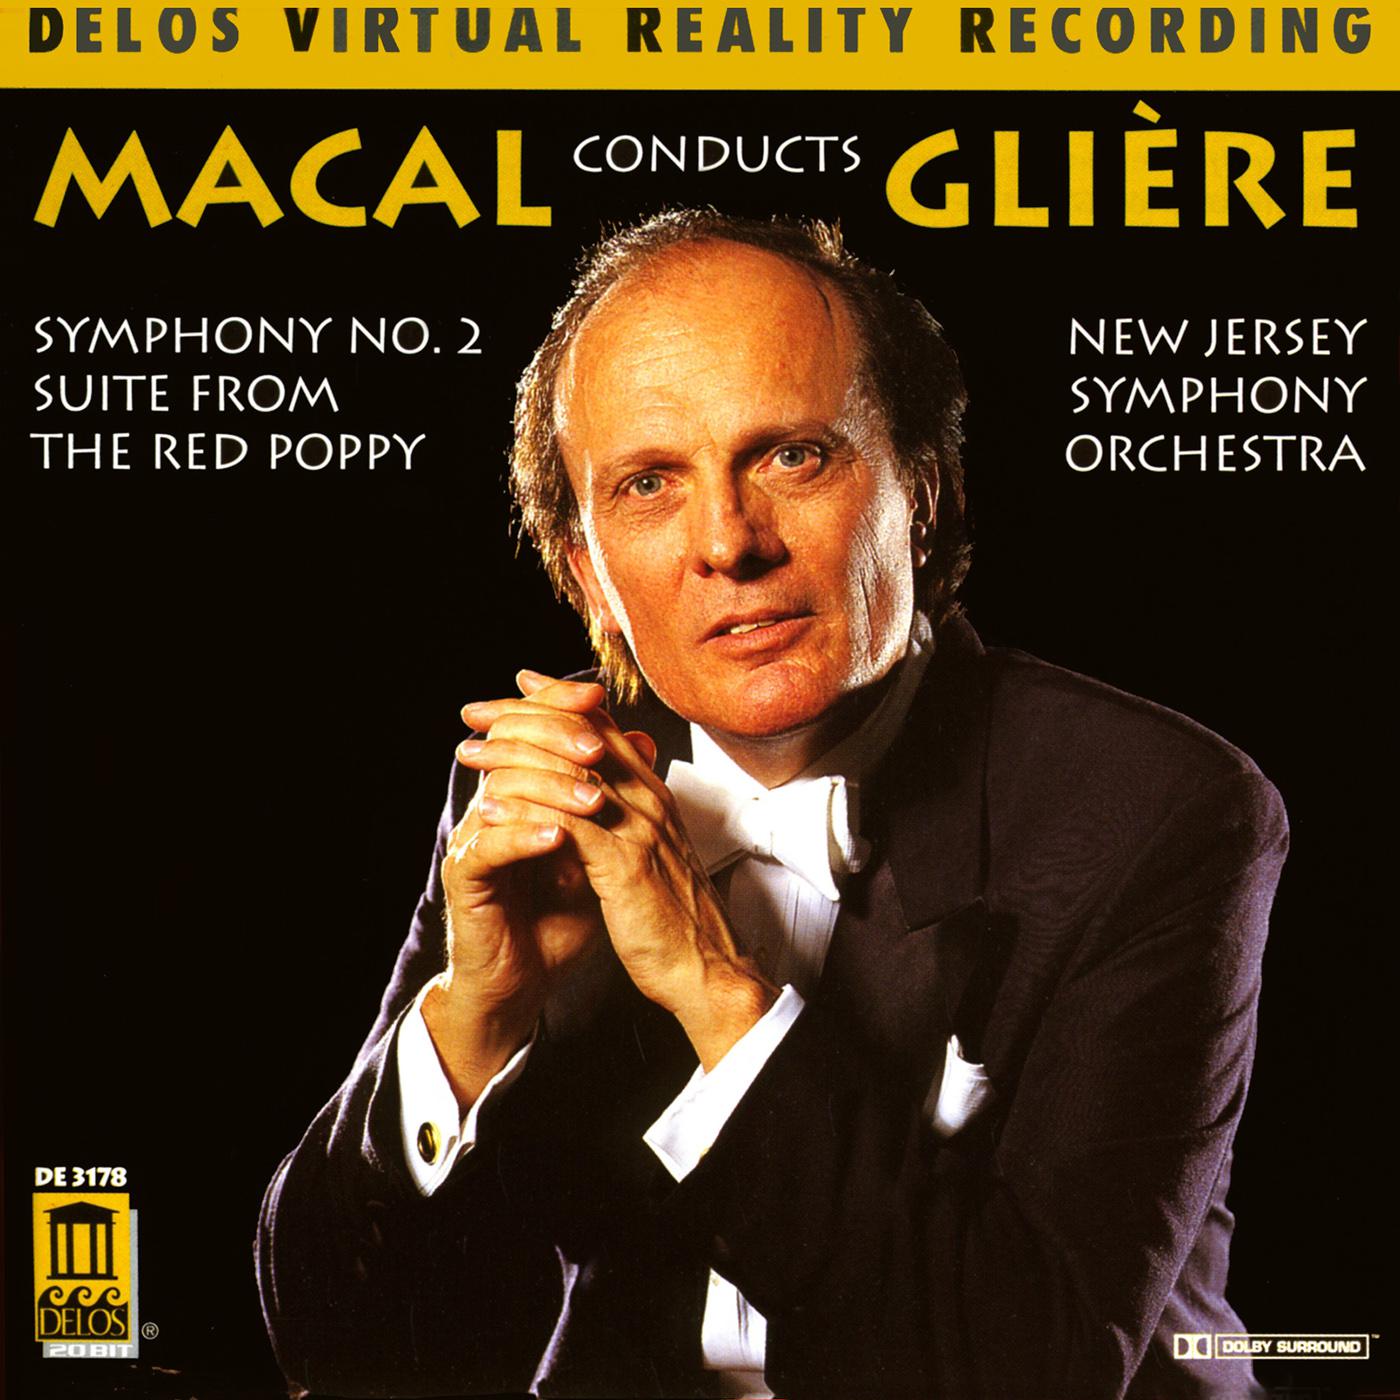 GLIERE, R.: Symphony No. 2 / The Red Poppy Suite (New Jersey Symphony, Macal)